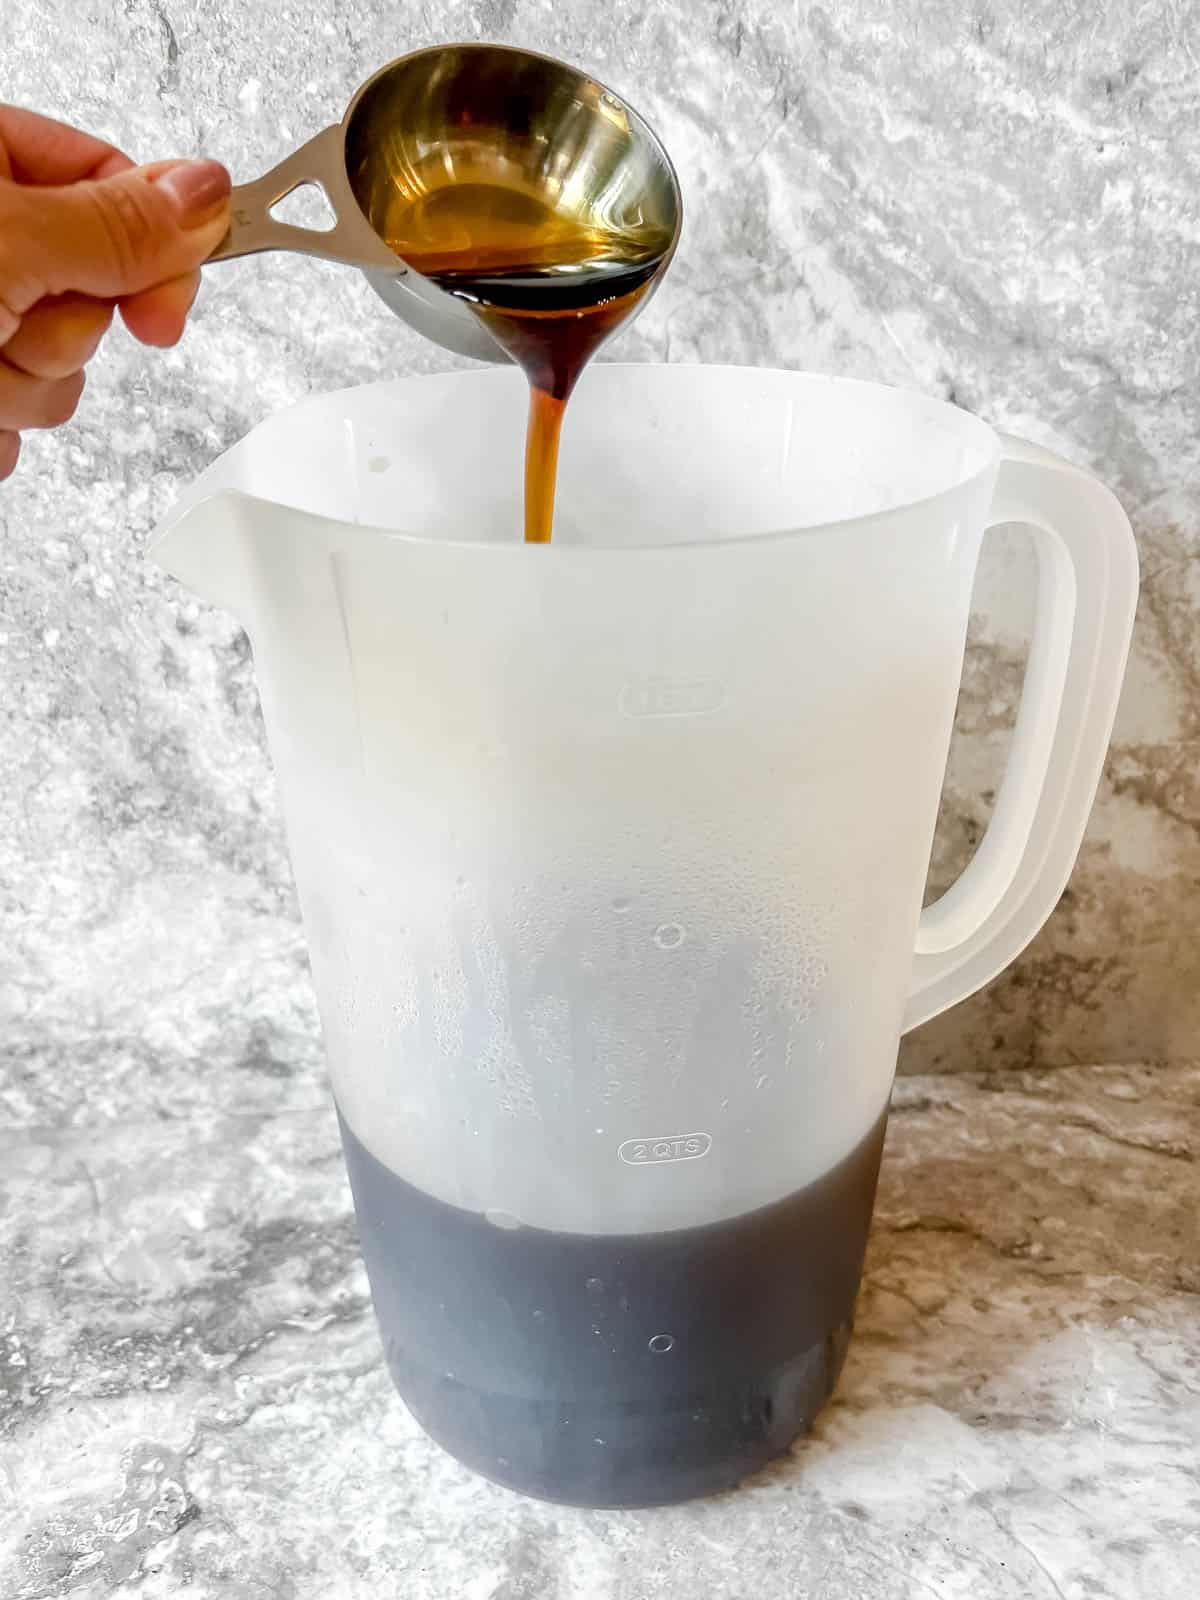 Maple syrup being added to sweet tea.